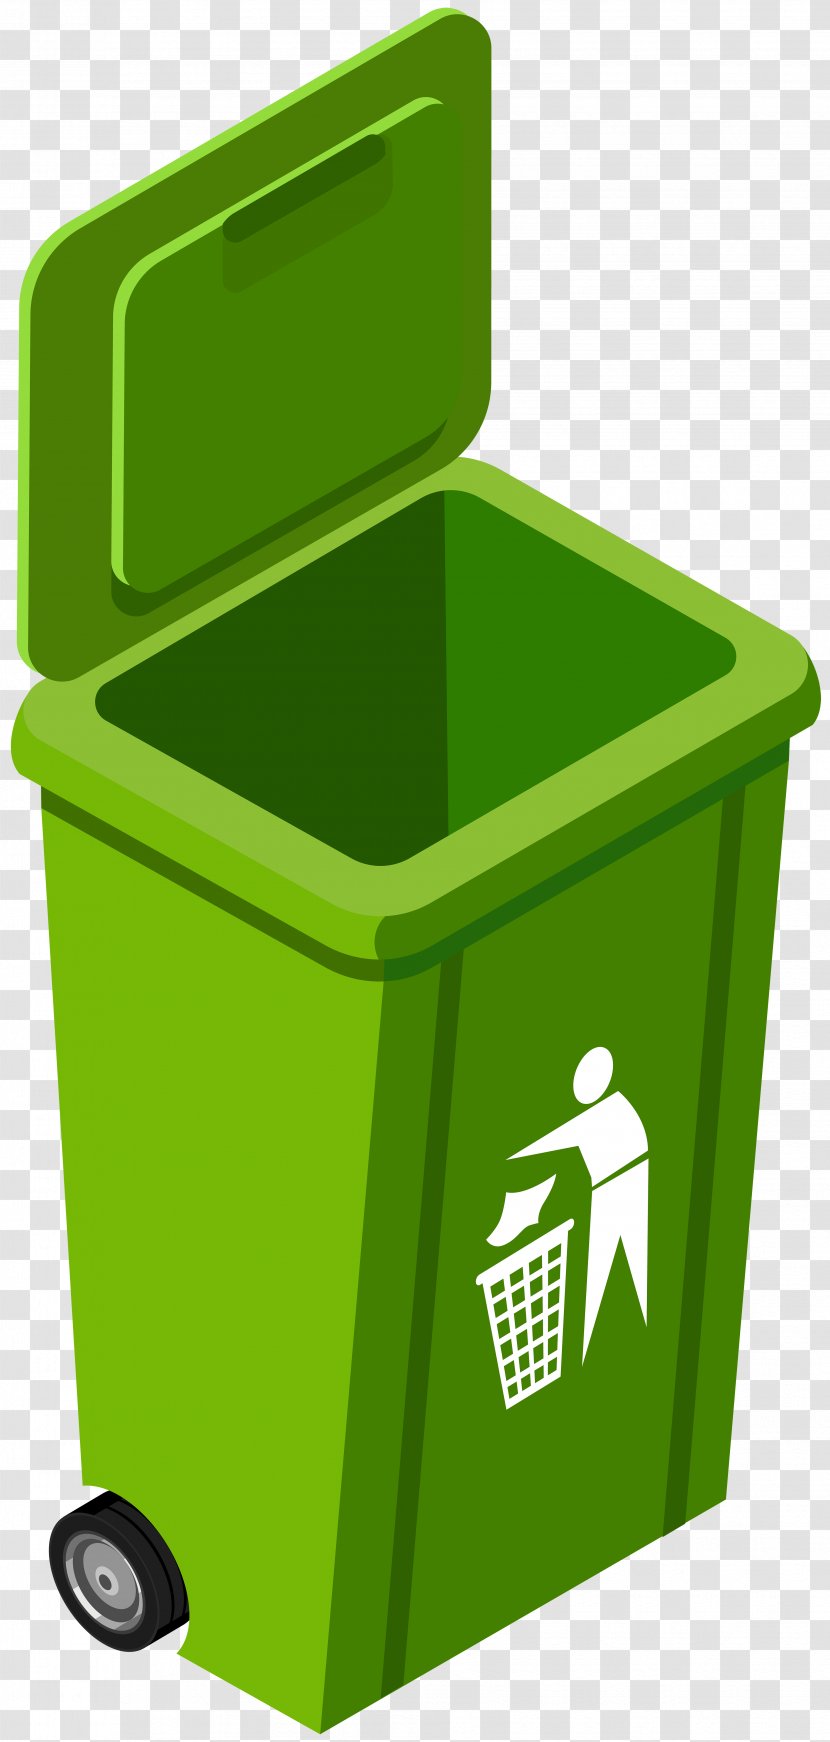 Rubbish Bins & Waste Paper Baskets Recycling Bin Clip Art - Green - Cans Transparent PNG